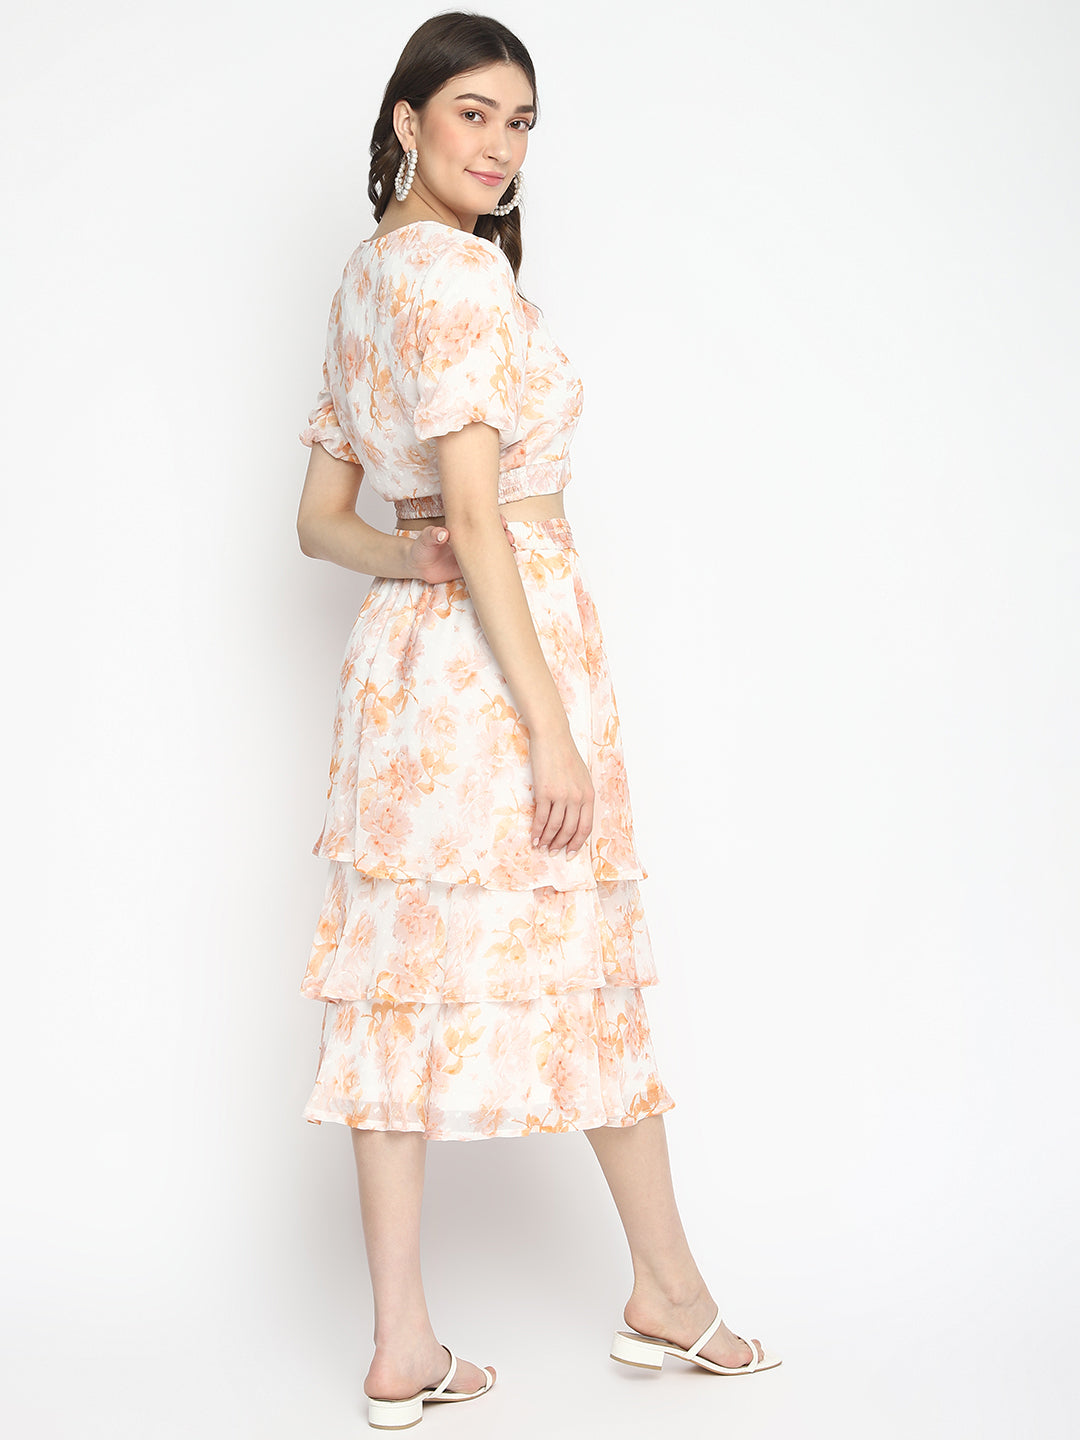 Orange Floral Printed V-Neck With Peasant Sleeves Layered Fit & Flare Dress